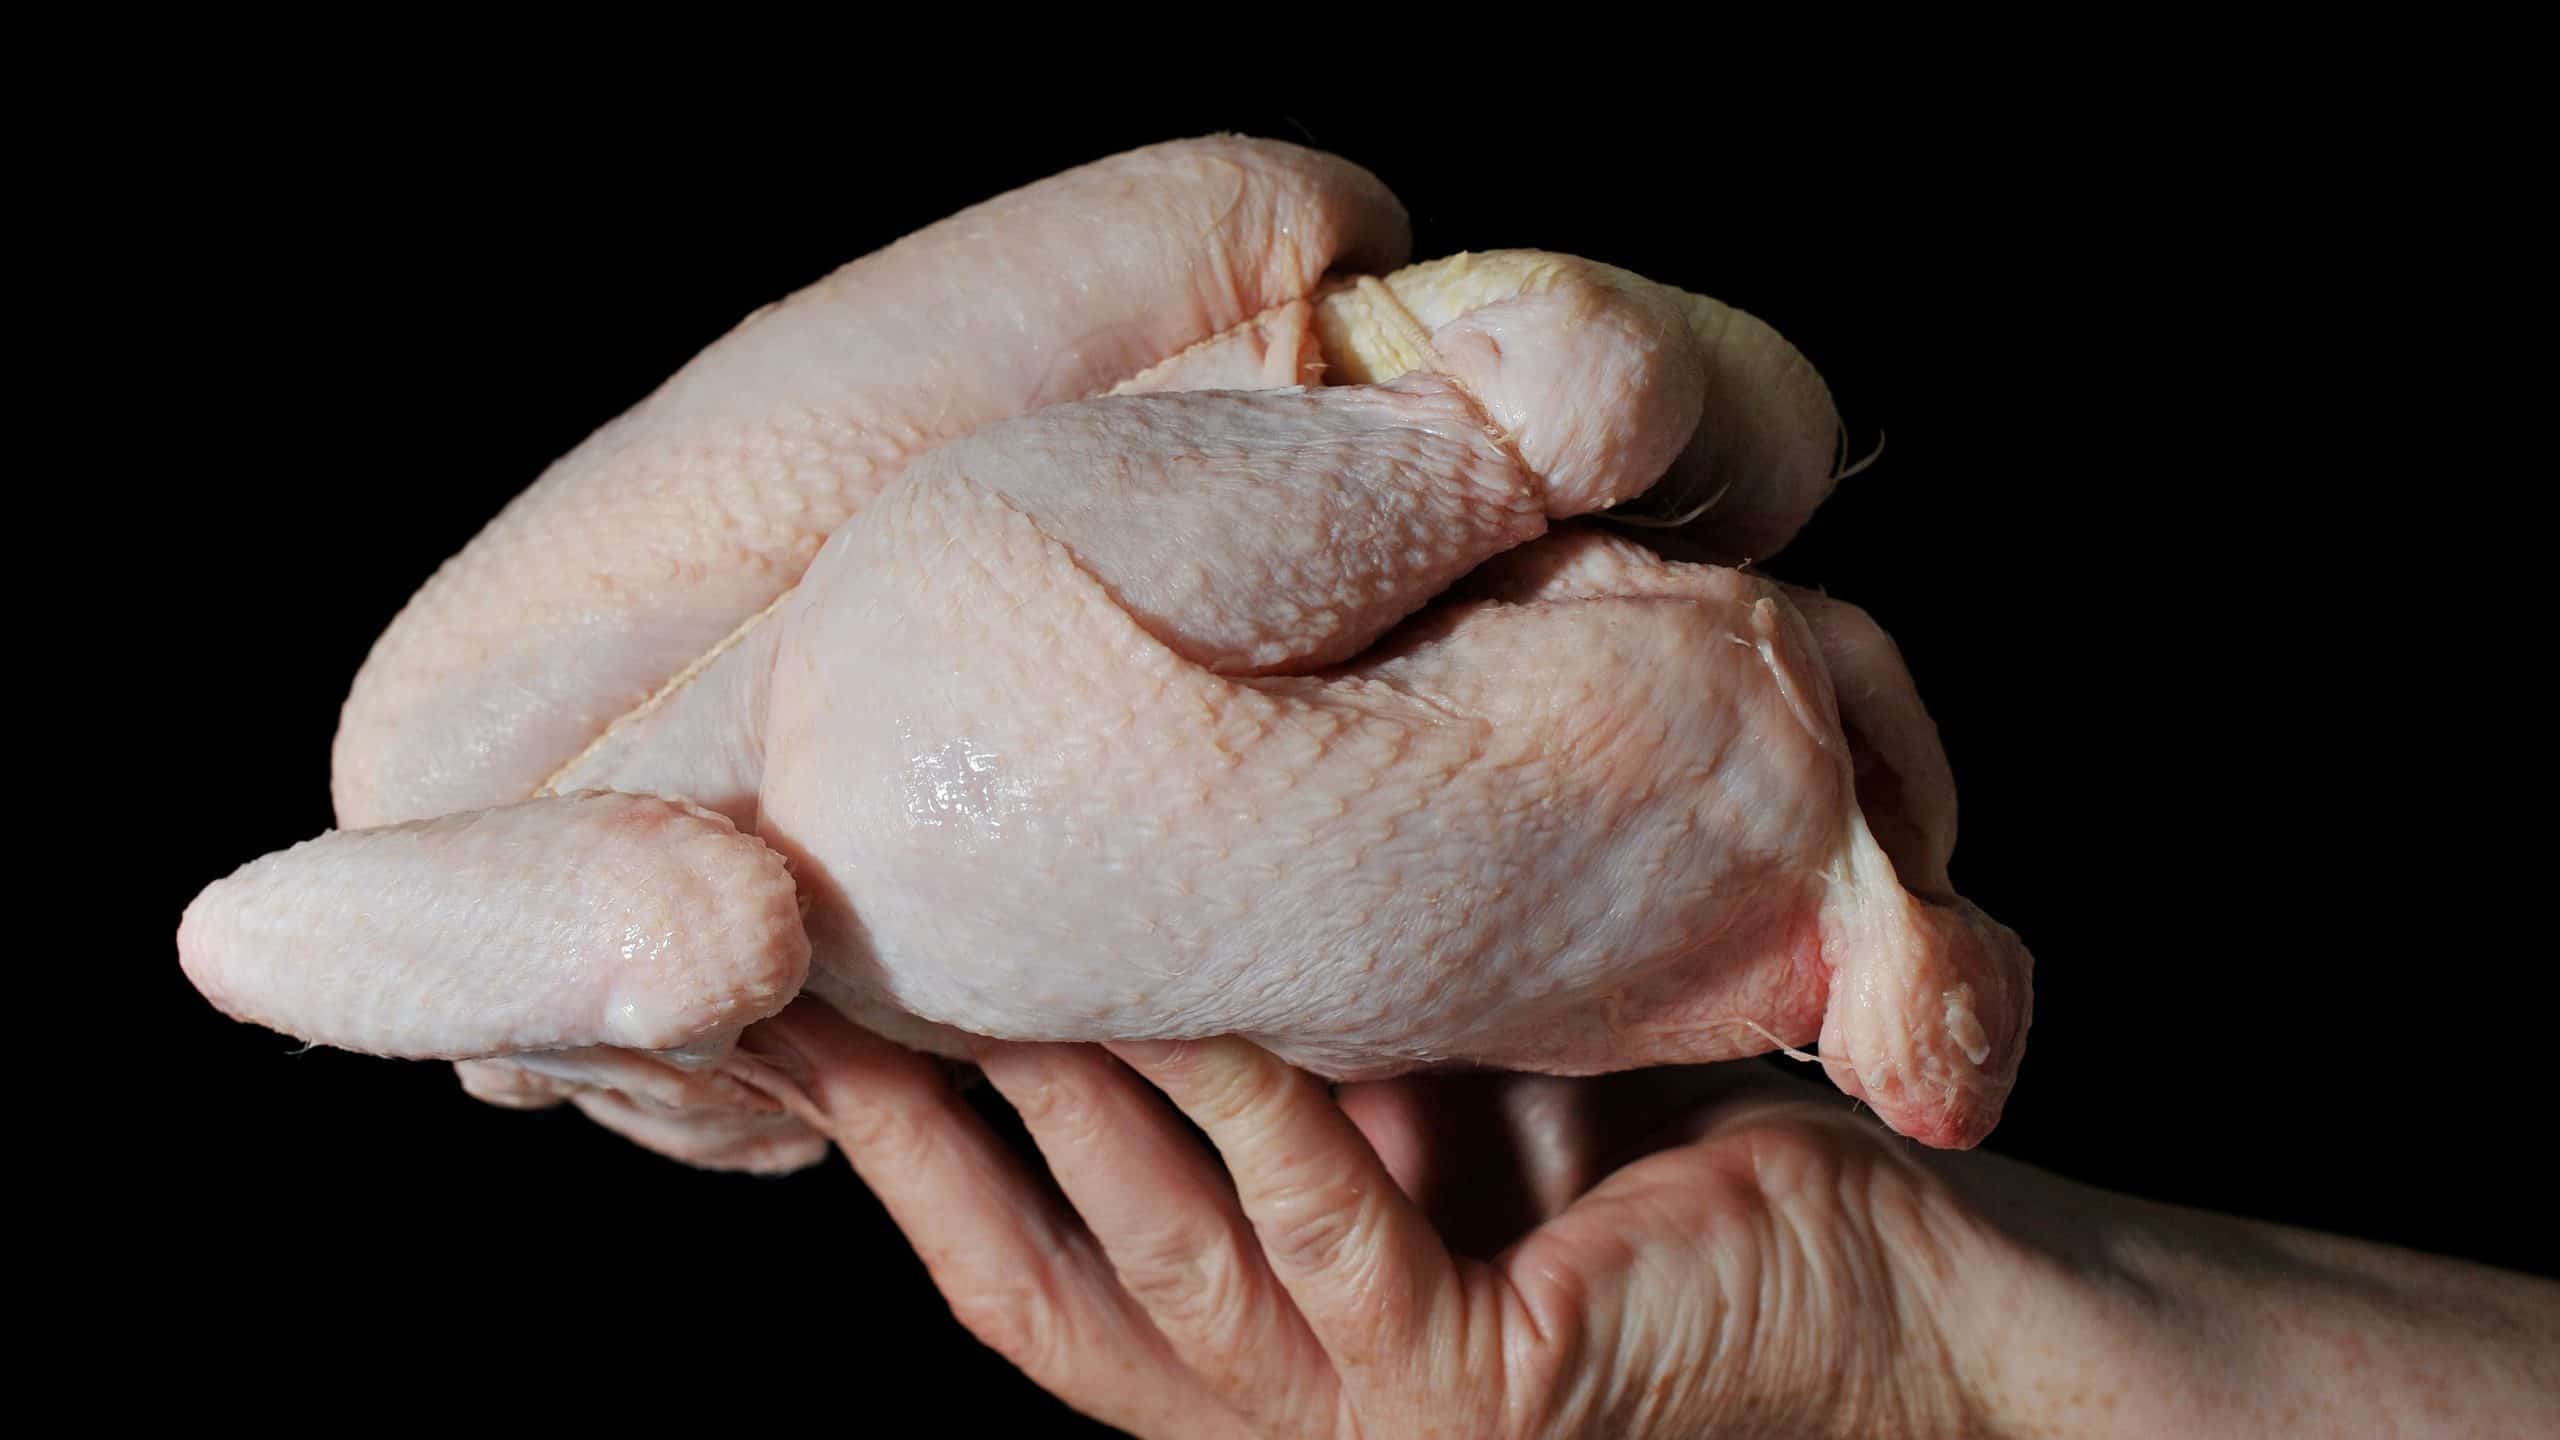 These are the supermarkets who have refused to explicitly ban the sale of chlorinated chicken